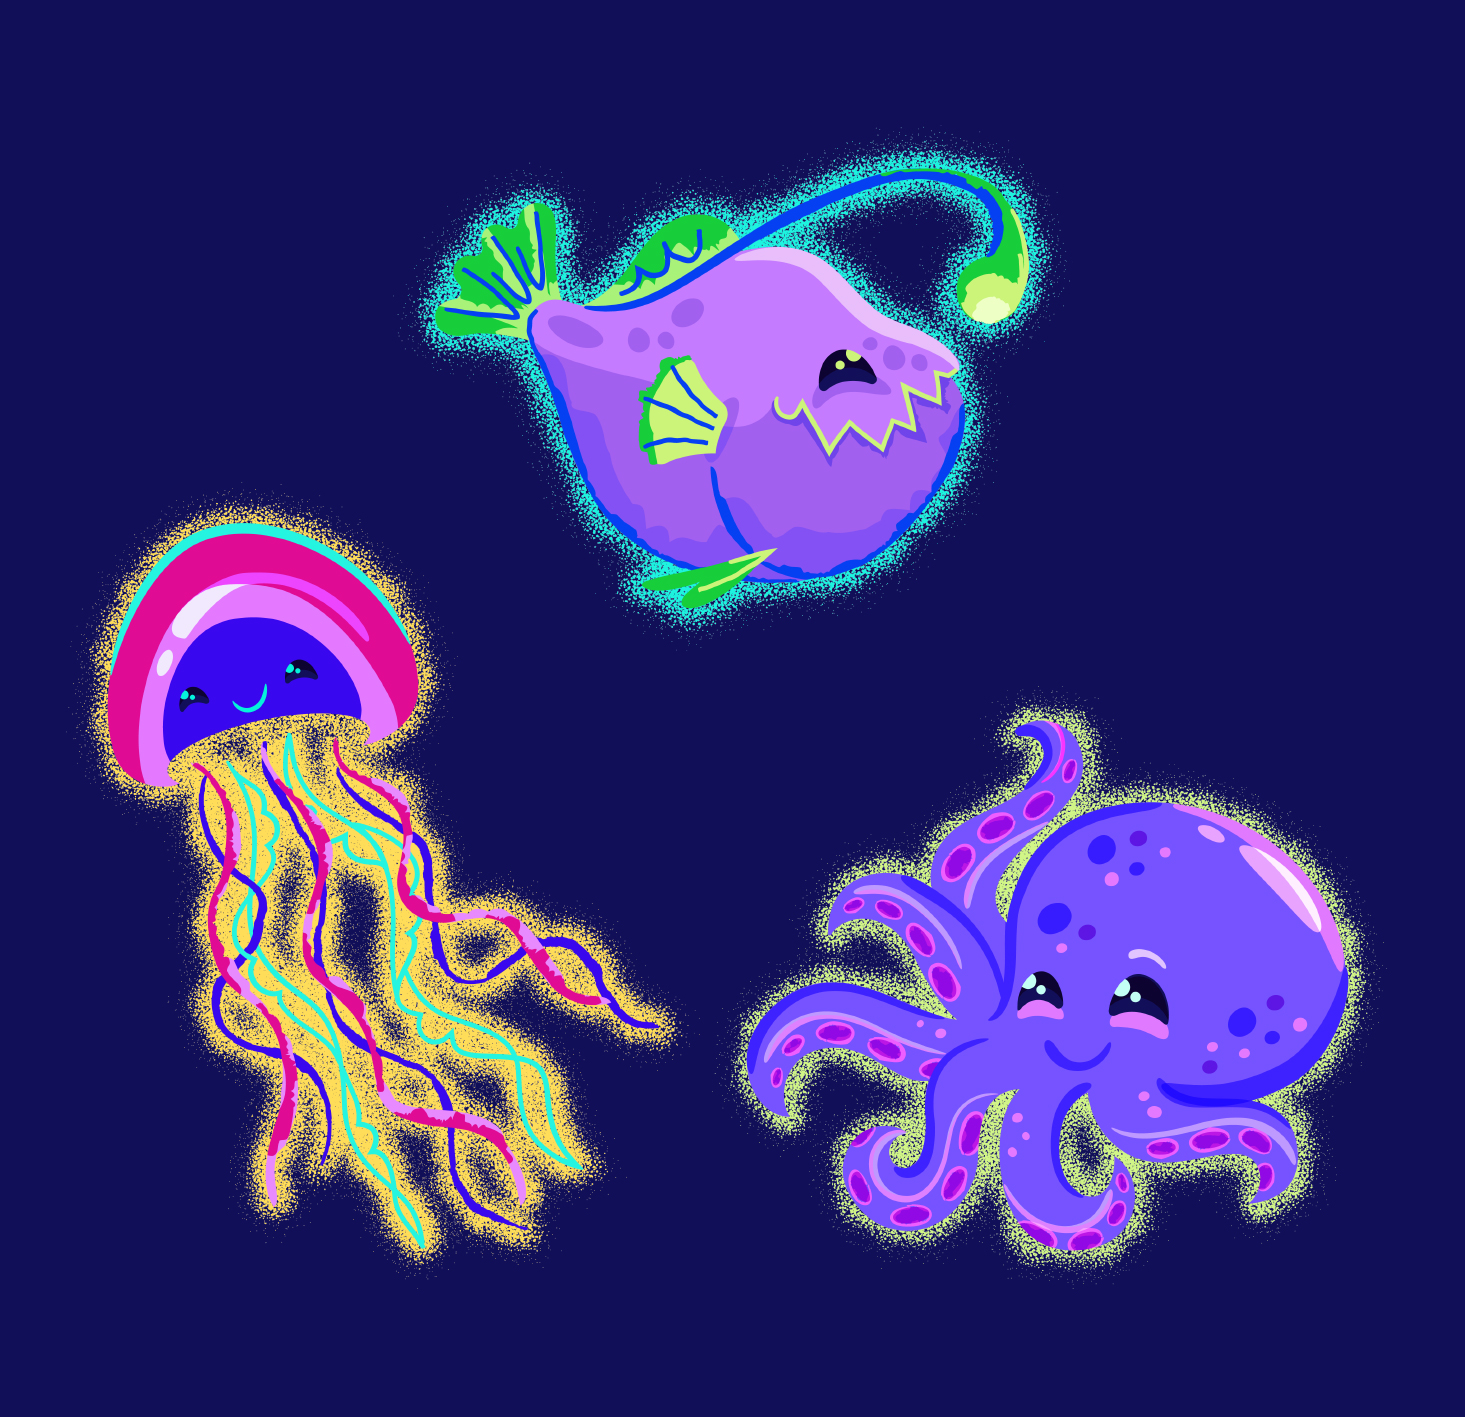 Illustrated character art that includes an anglerfish, a jellyfish, and octopus.